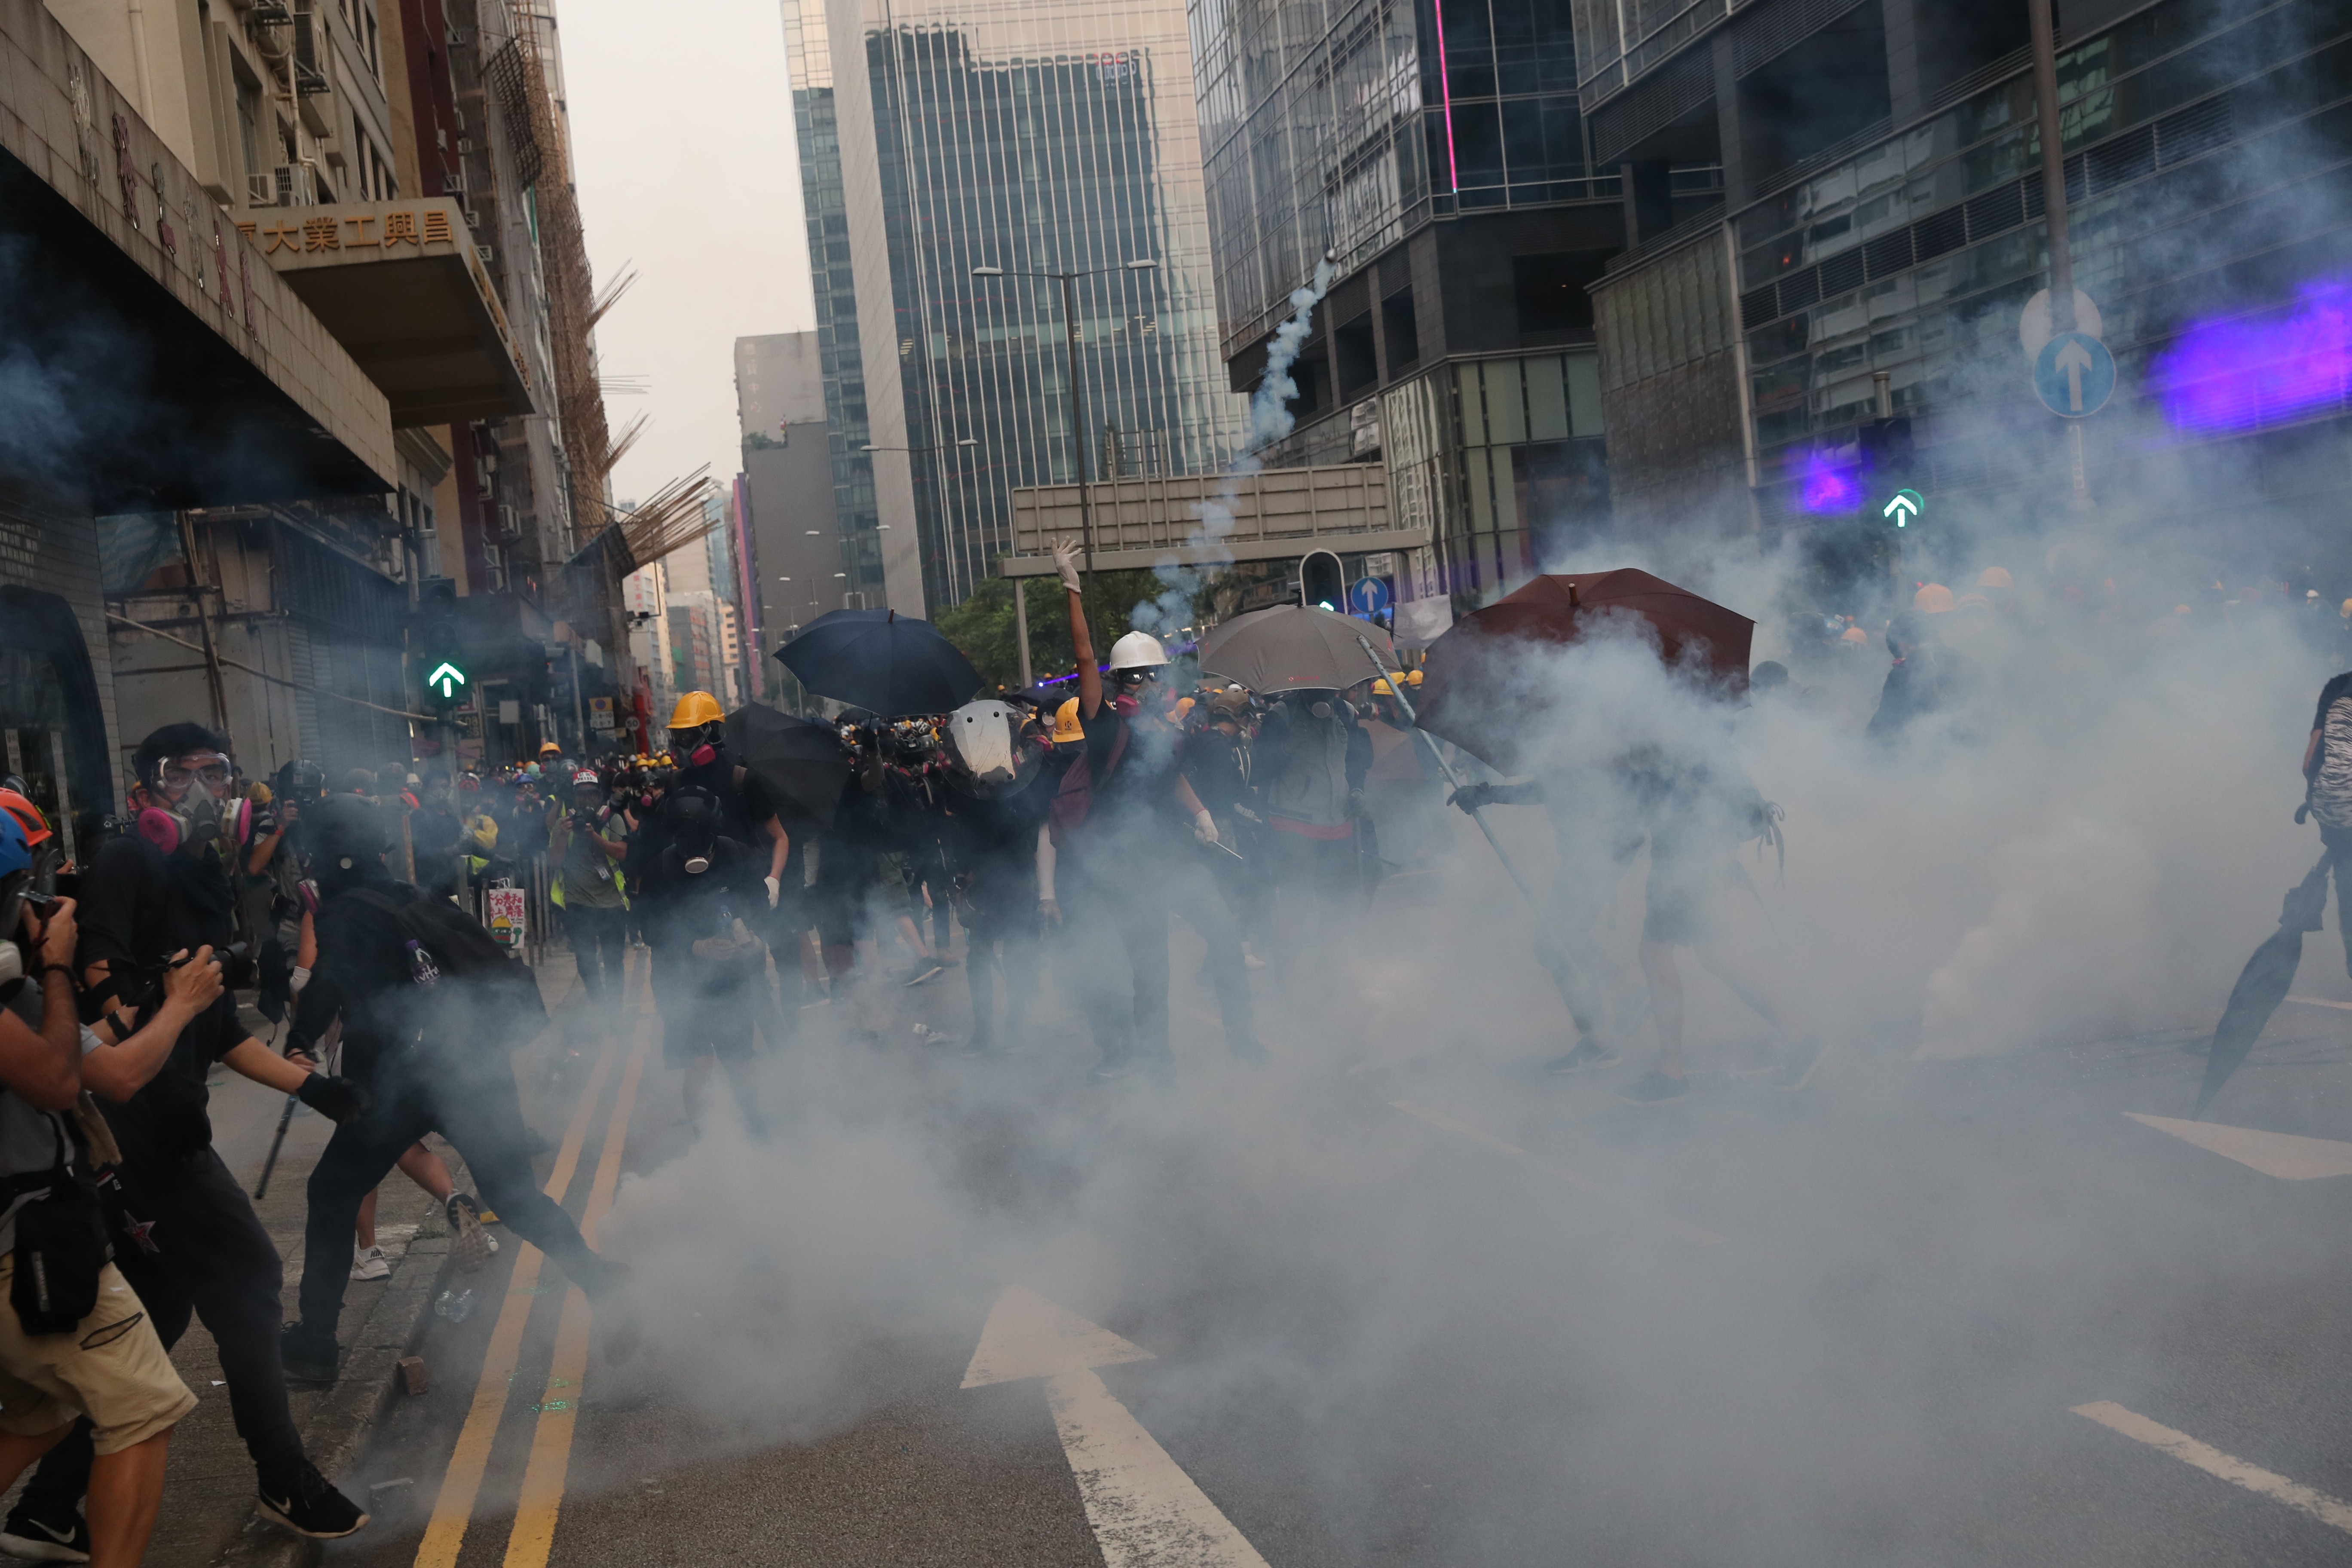 Tear gas is fired at anti-government protesters in Kwun Tong last week. Photo: Sam Tsang